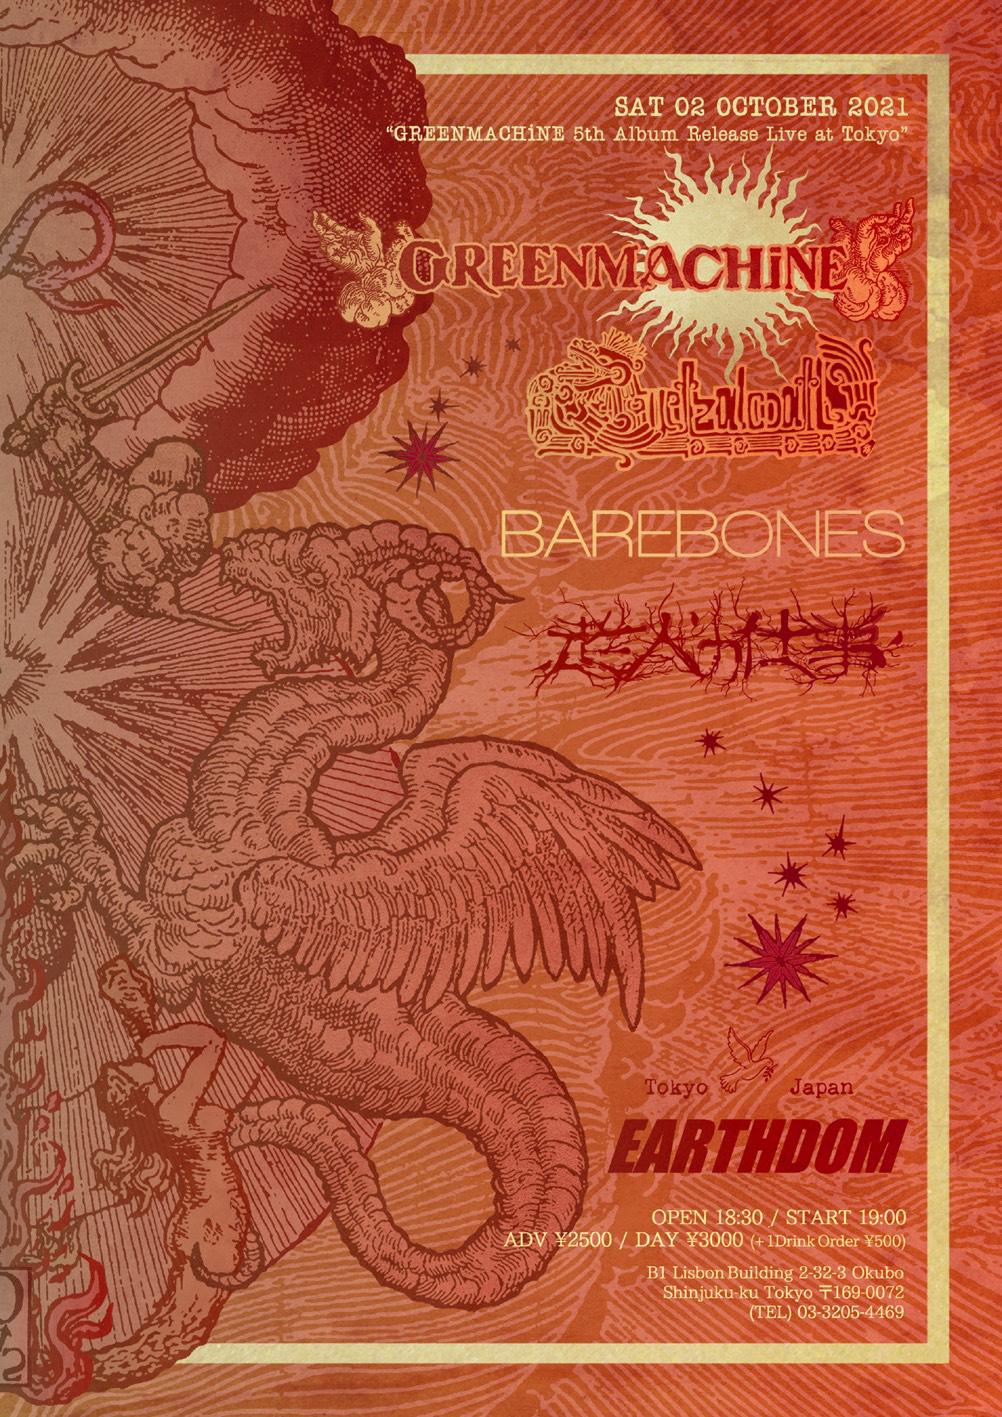 GREENMACHiNE 5th Album Release Live at 新大久保 Earthdom